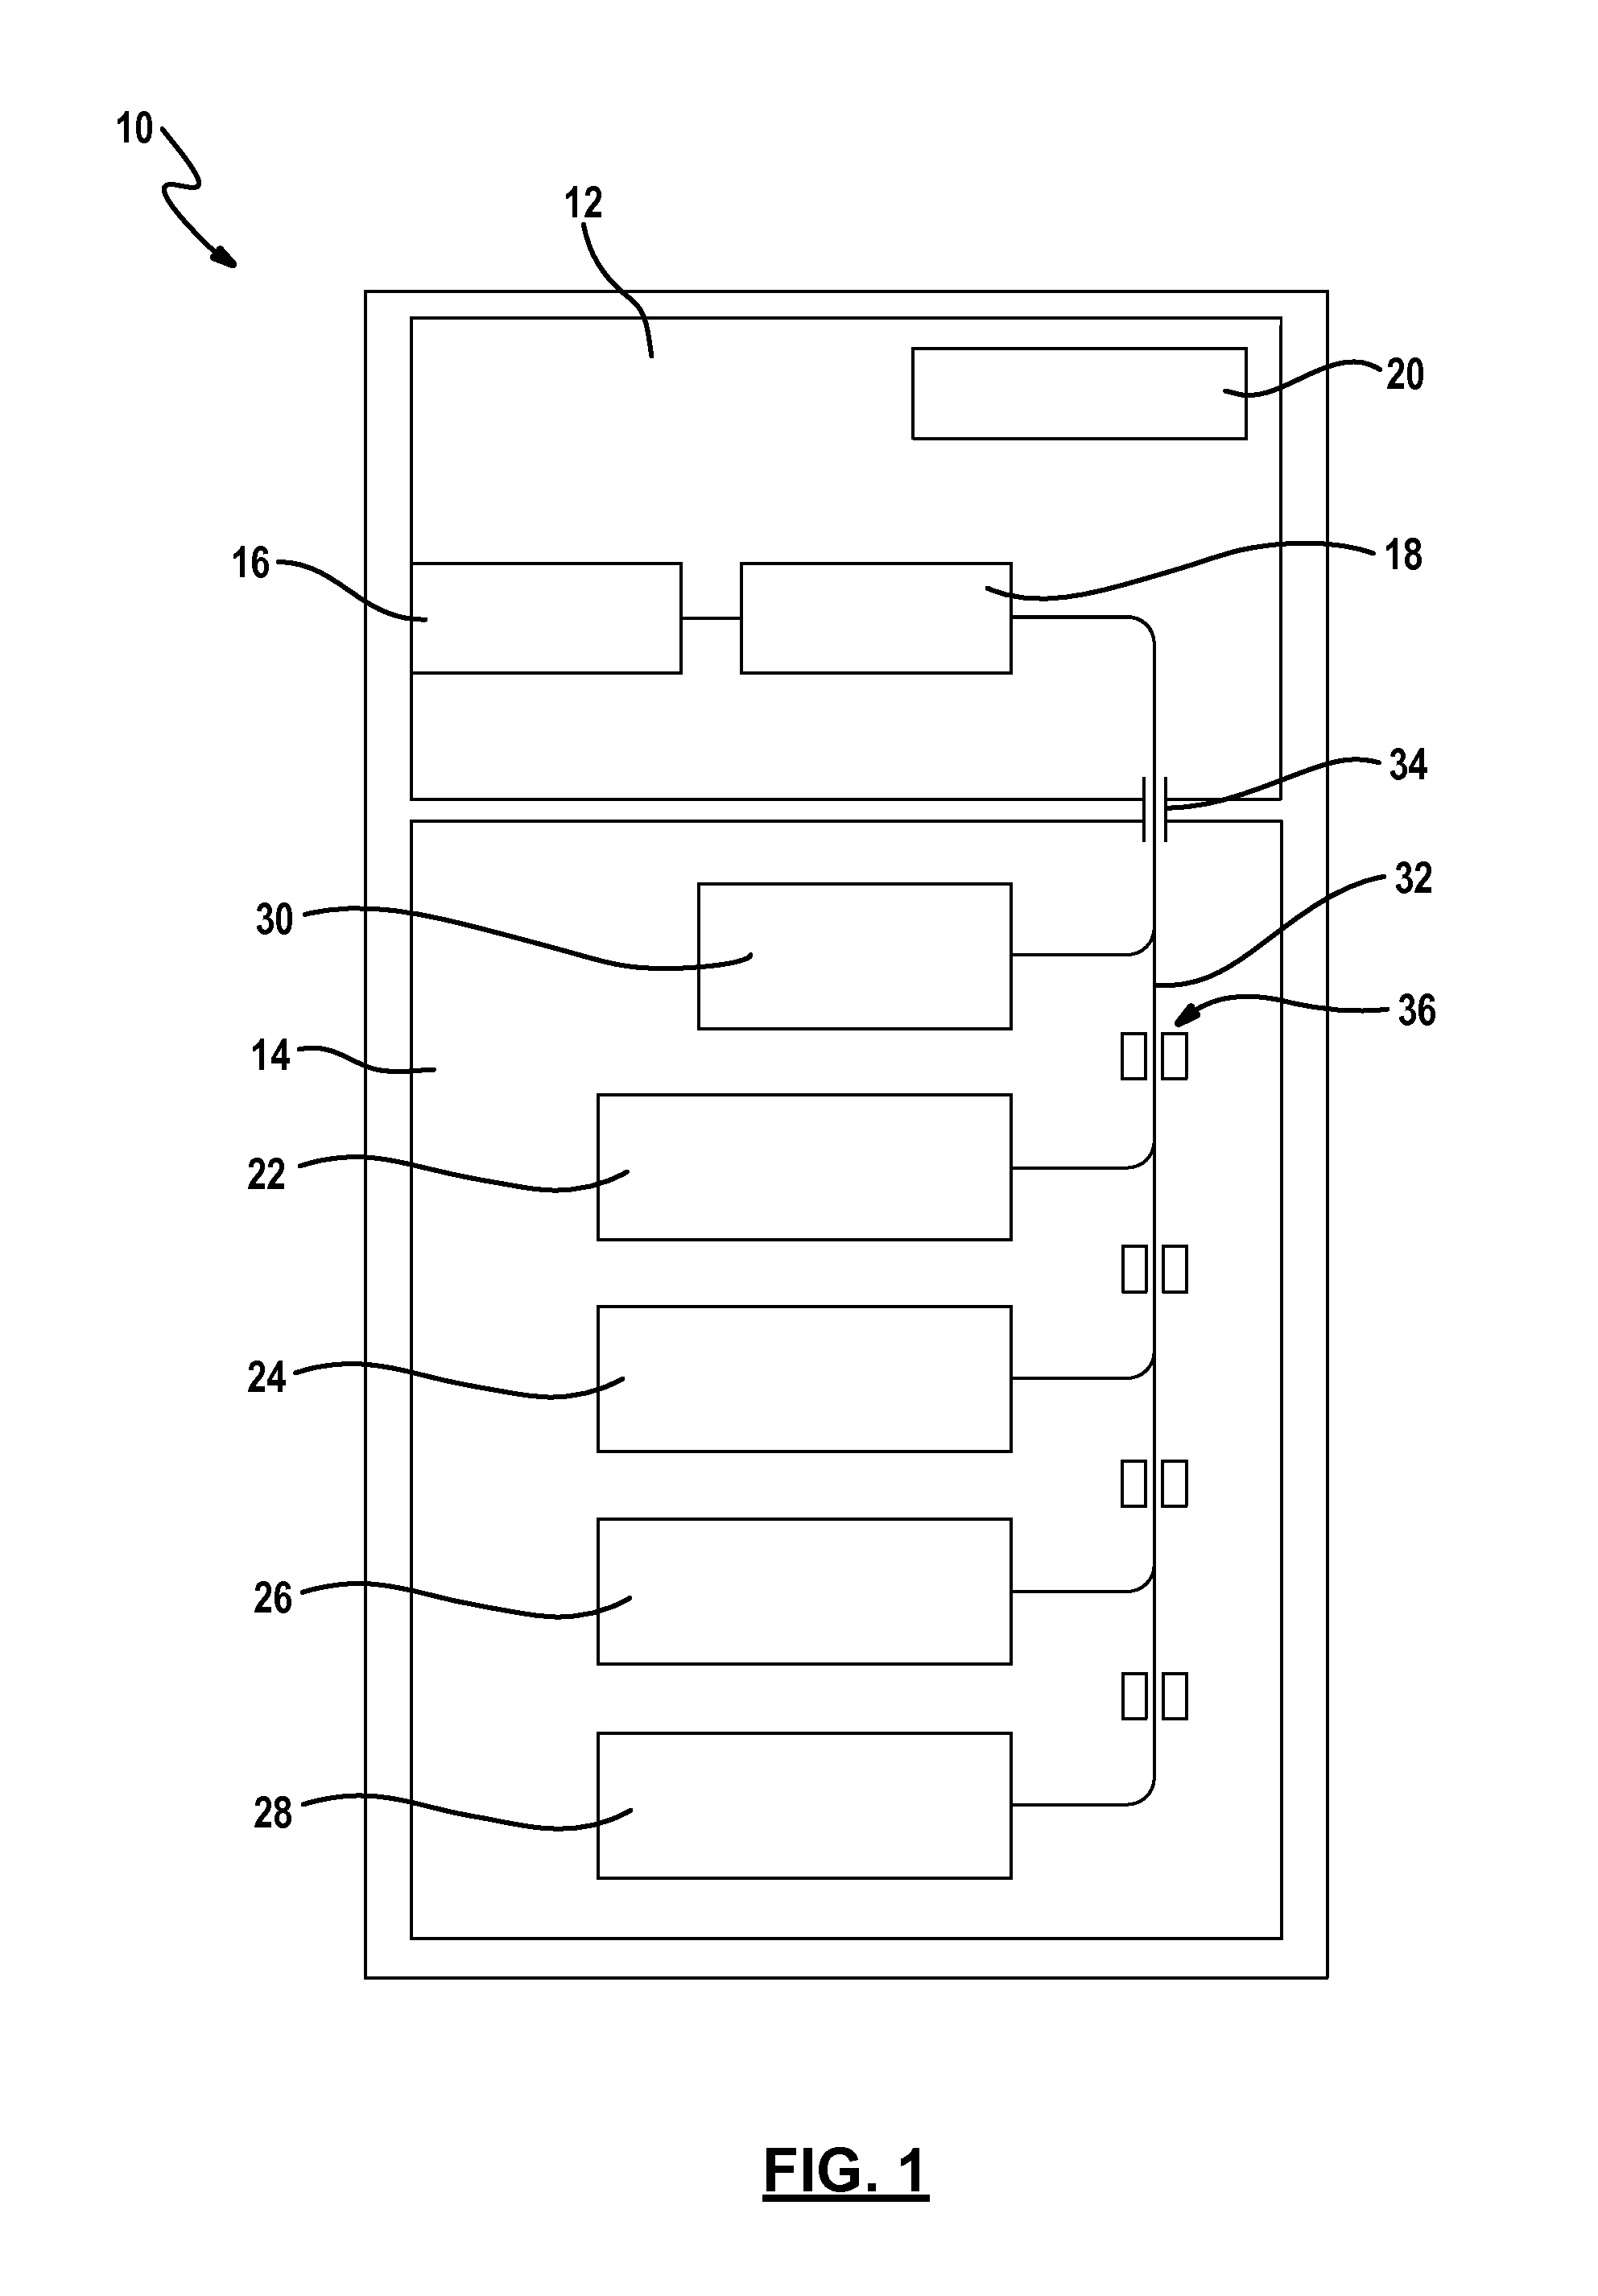 Device for handling currency notes and method for dealing with a currency note jam